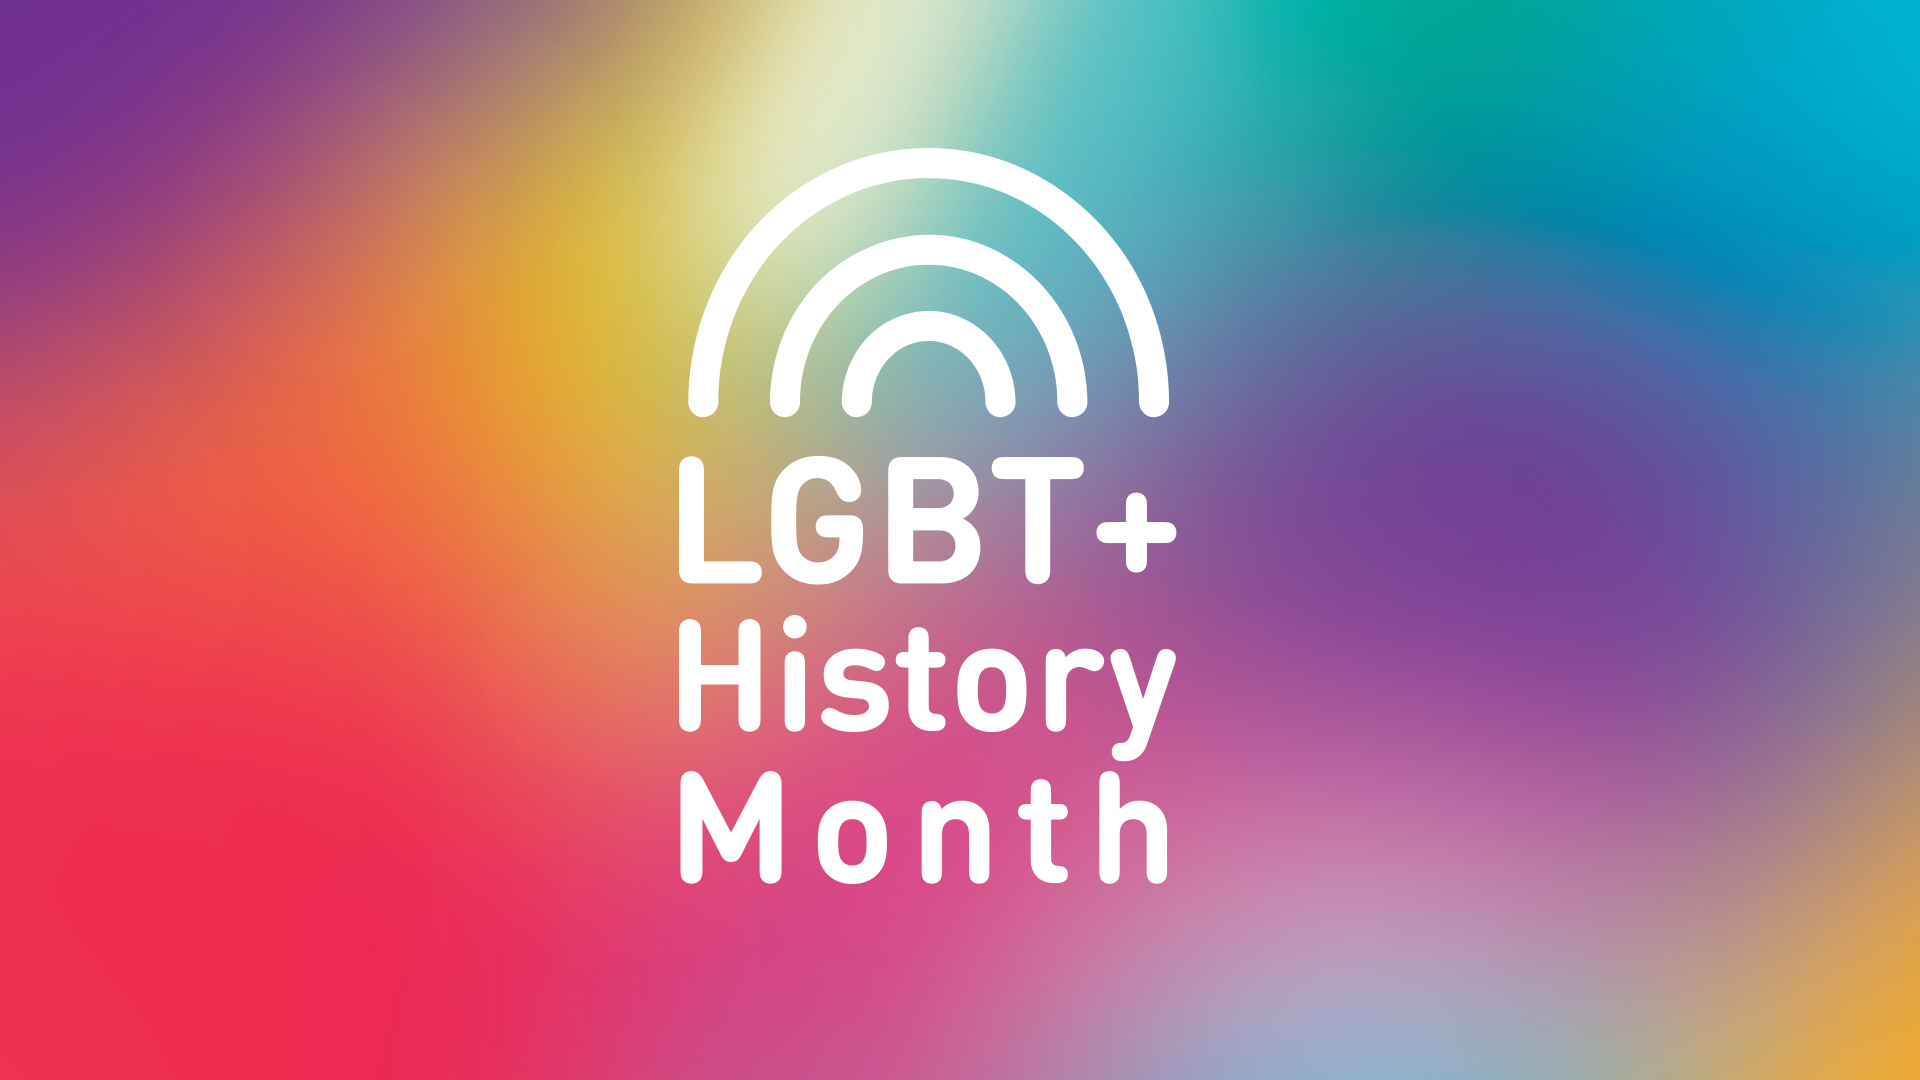 Reflections on LGBT+ History Month